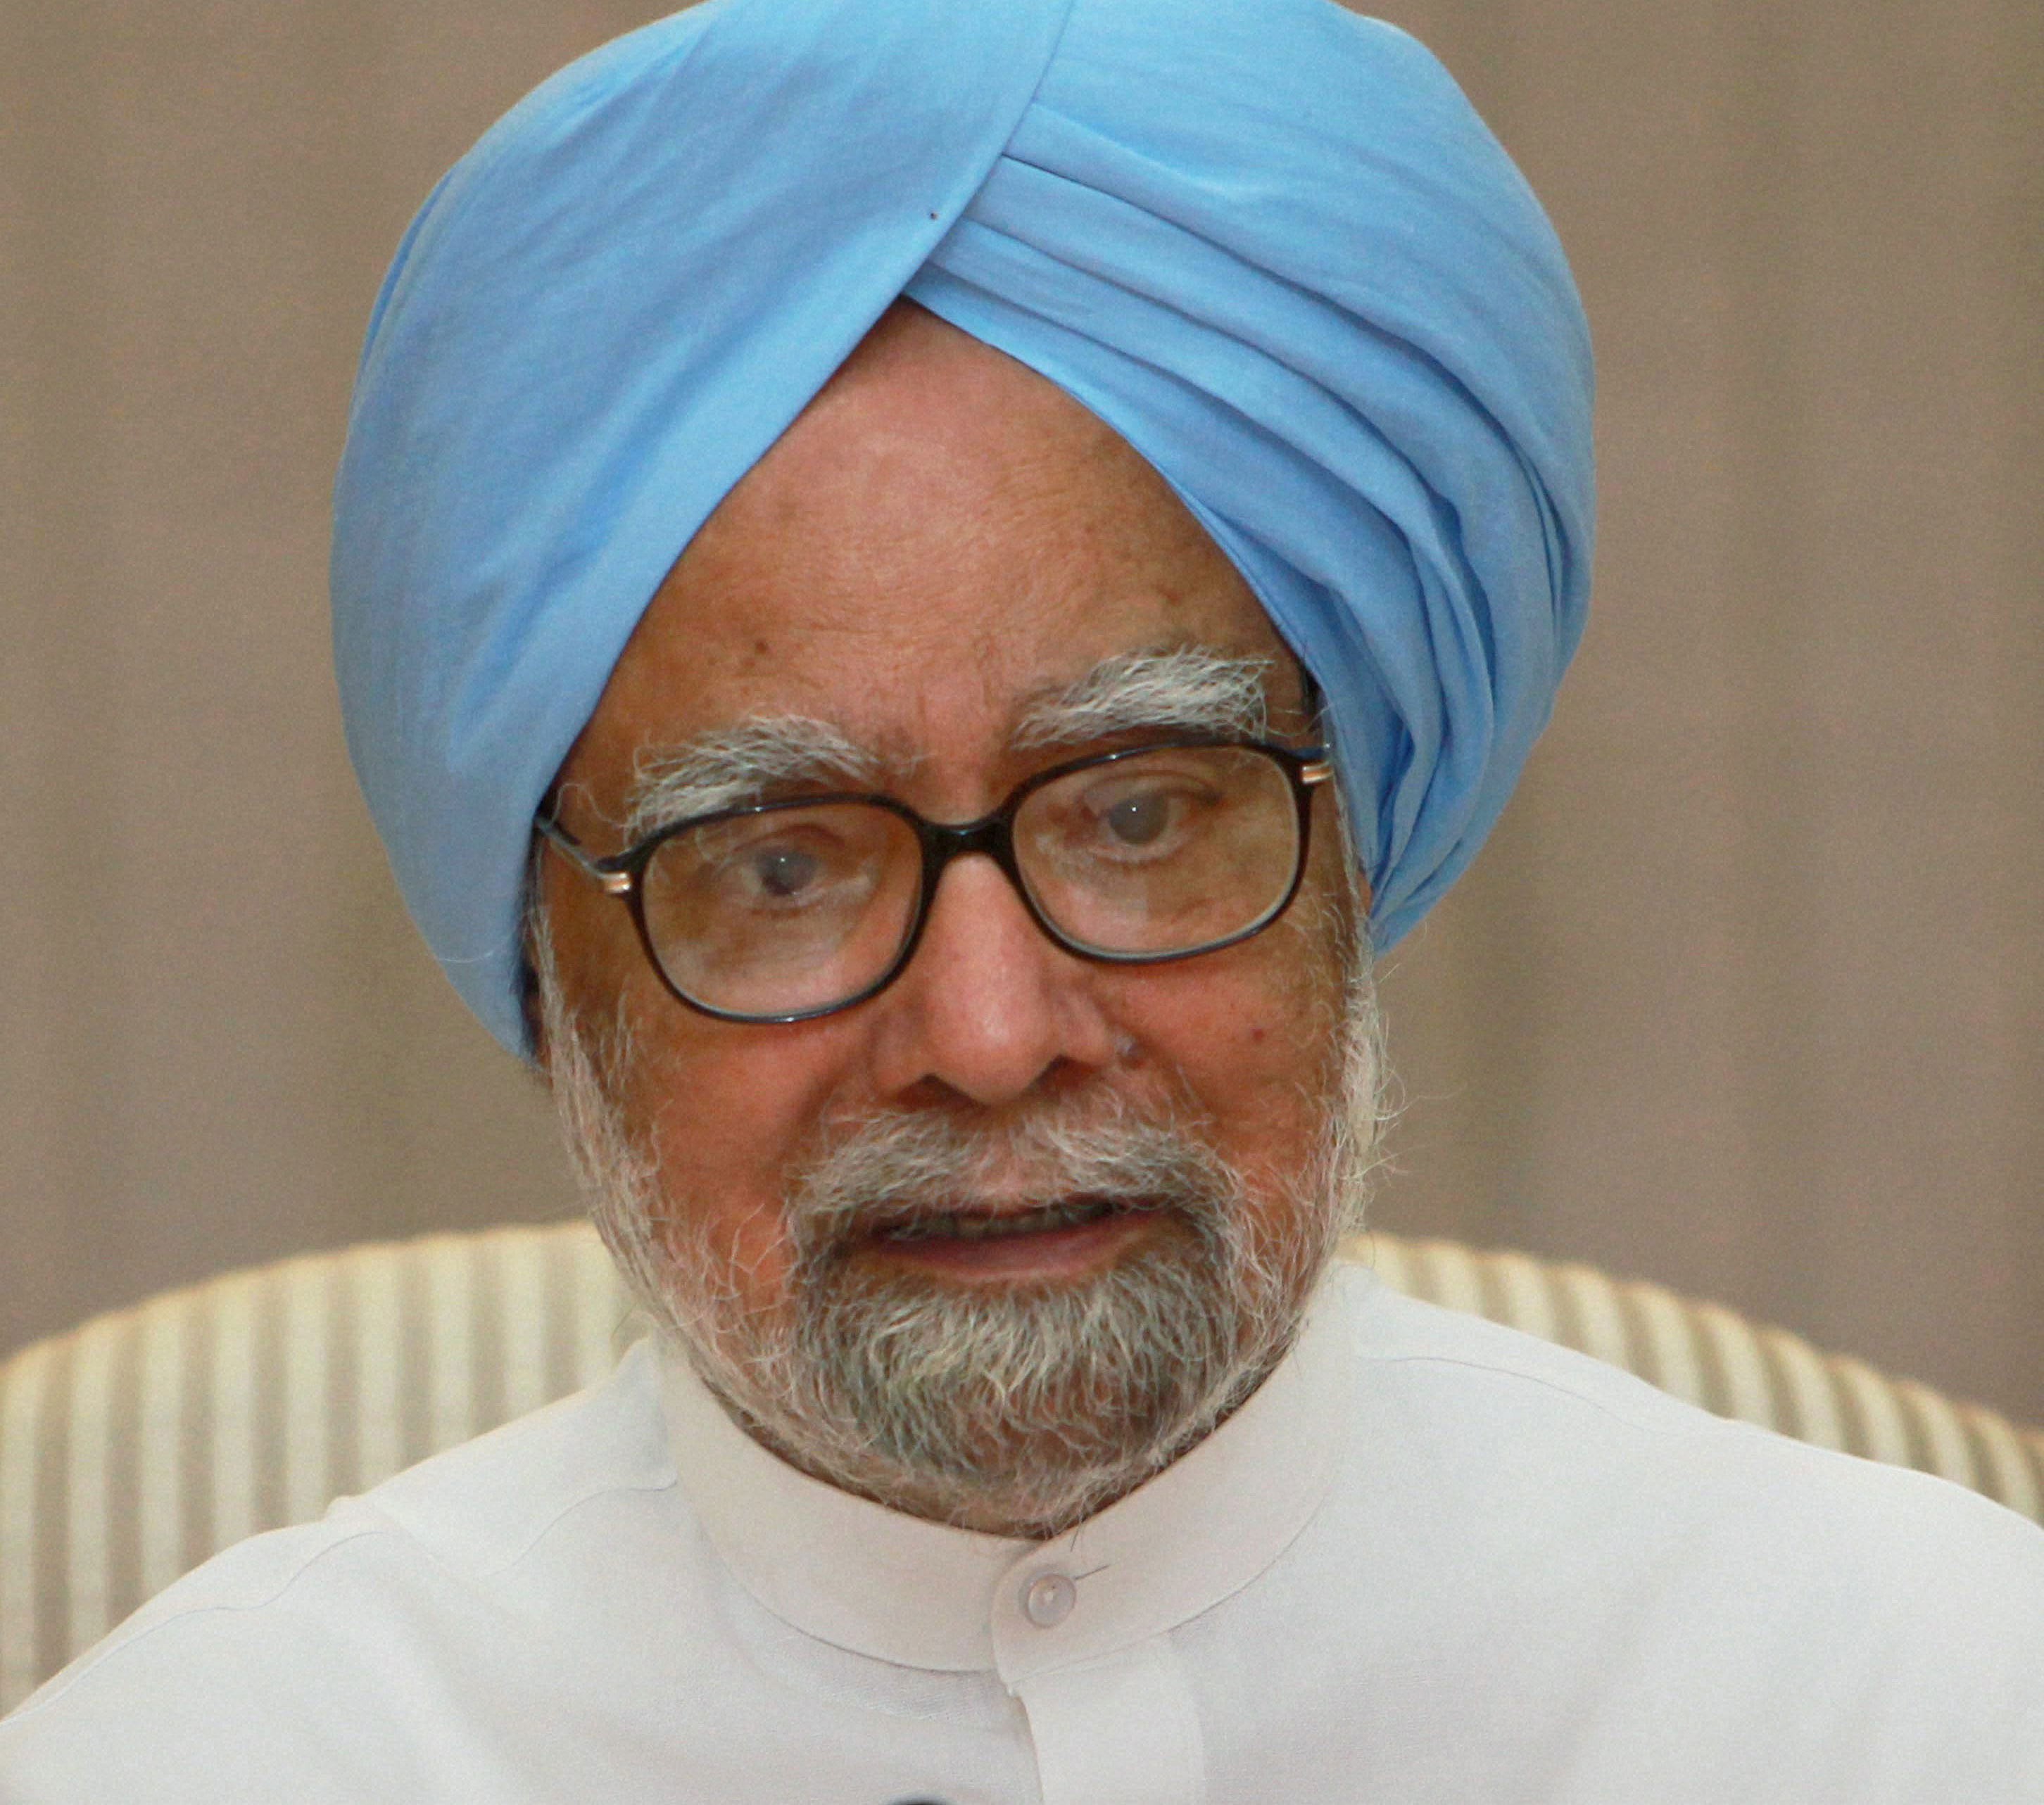 Prime Minister Manmohan Singh speaks to media after making an aerial survey of flood-hit areas in Uttarakhand in New Delhi on Wednesday. PTI Photo